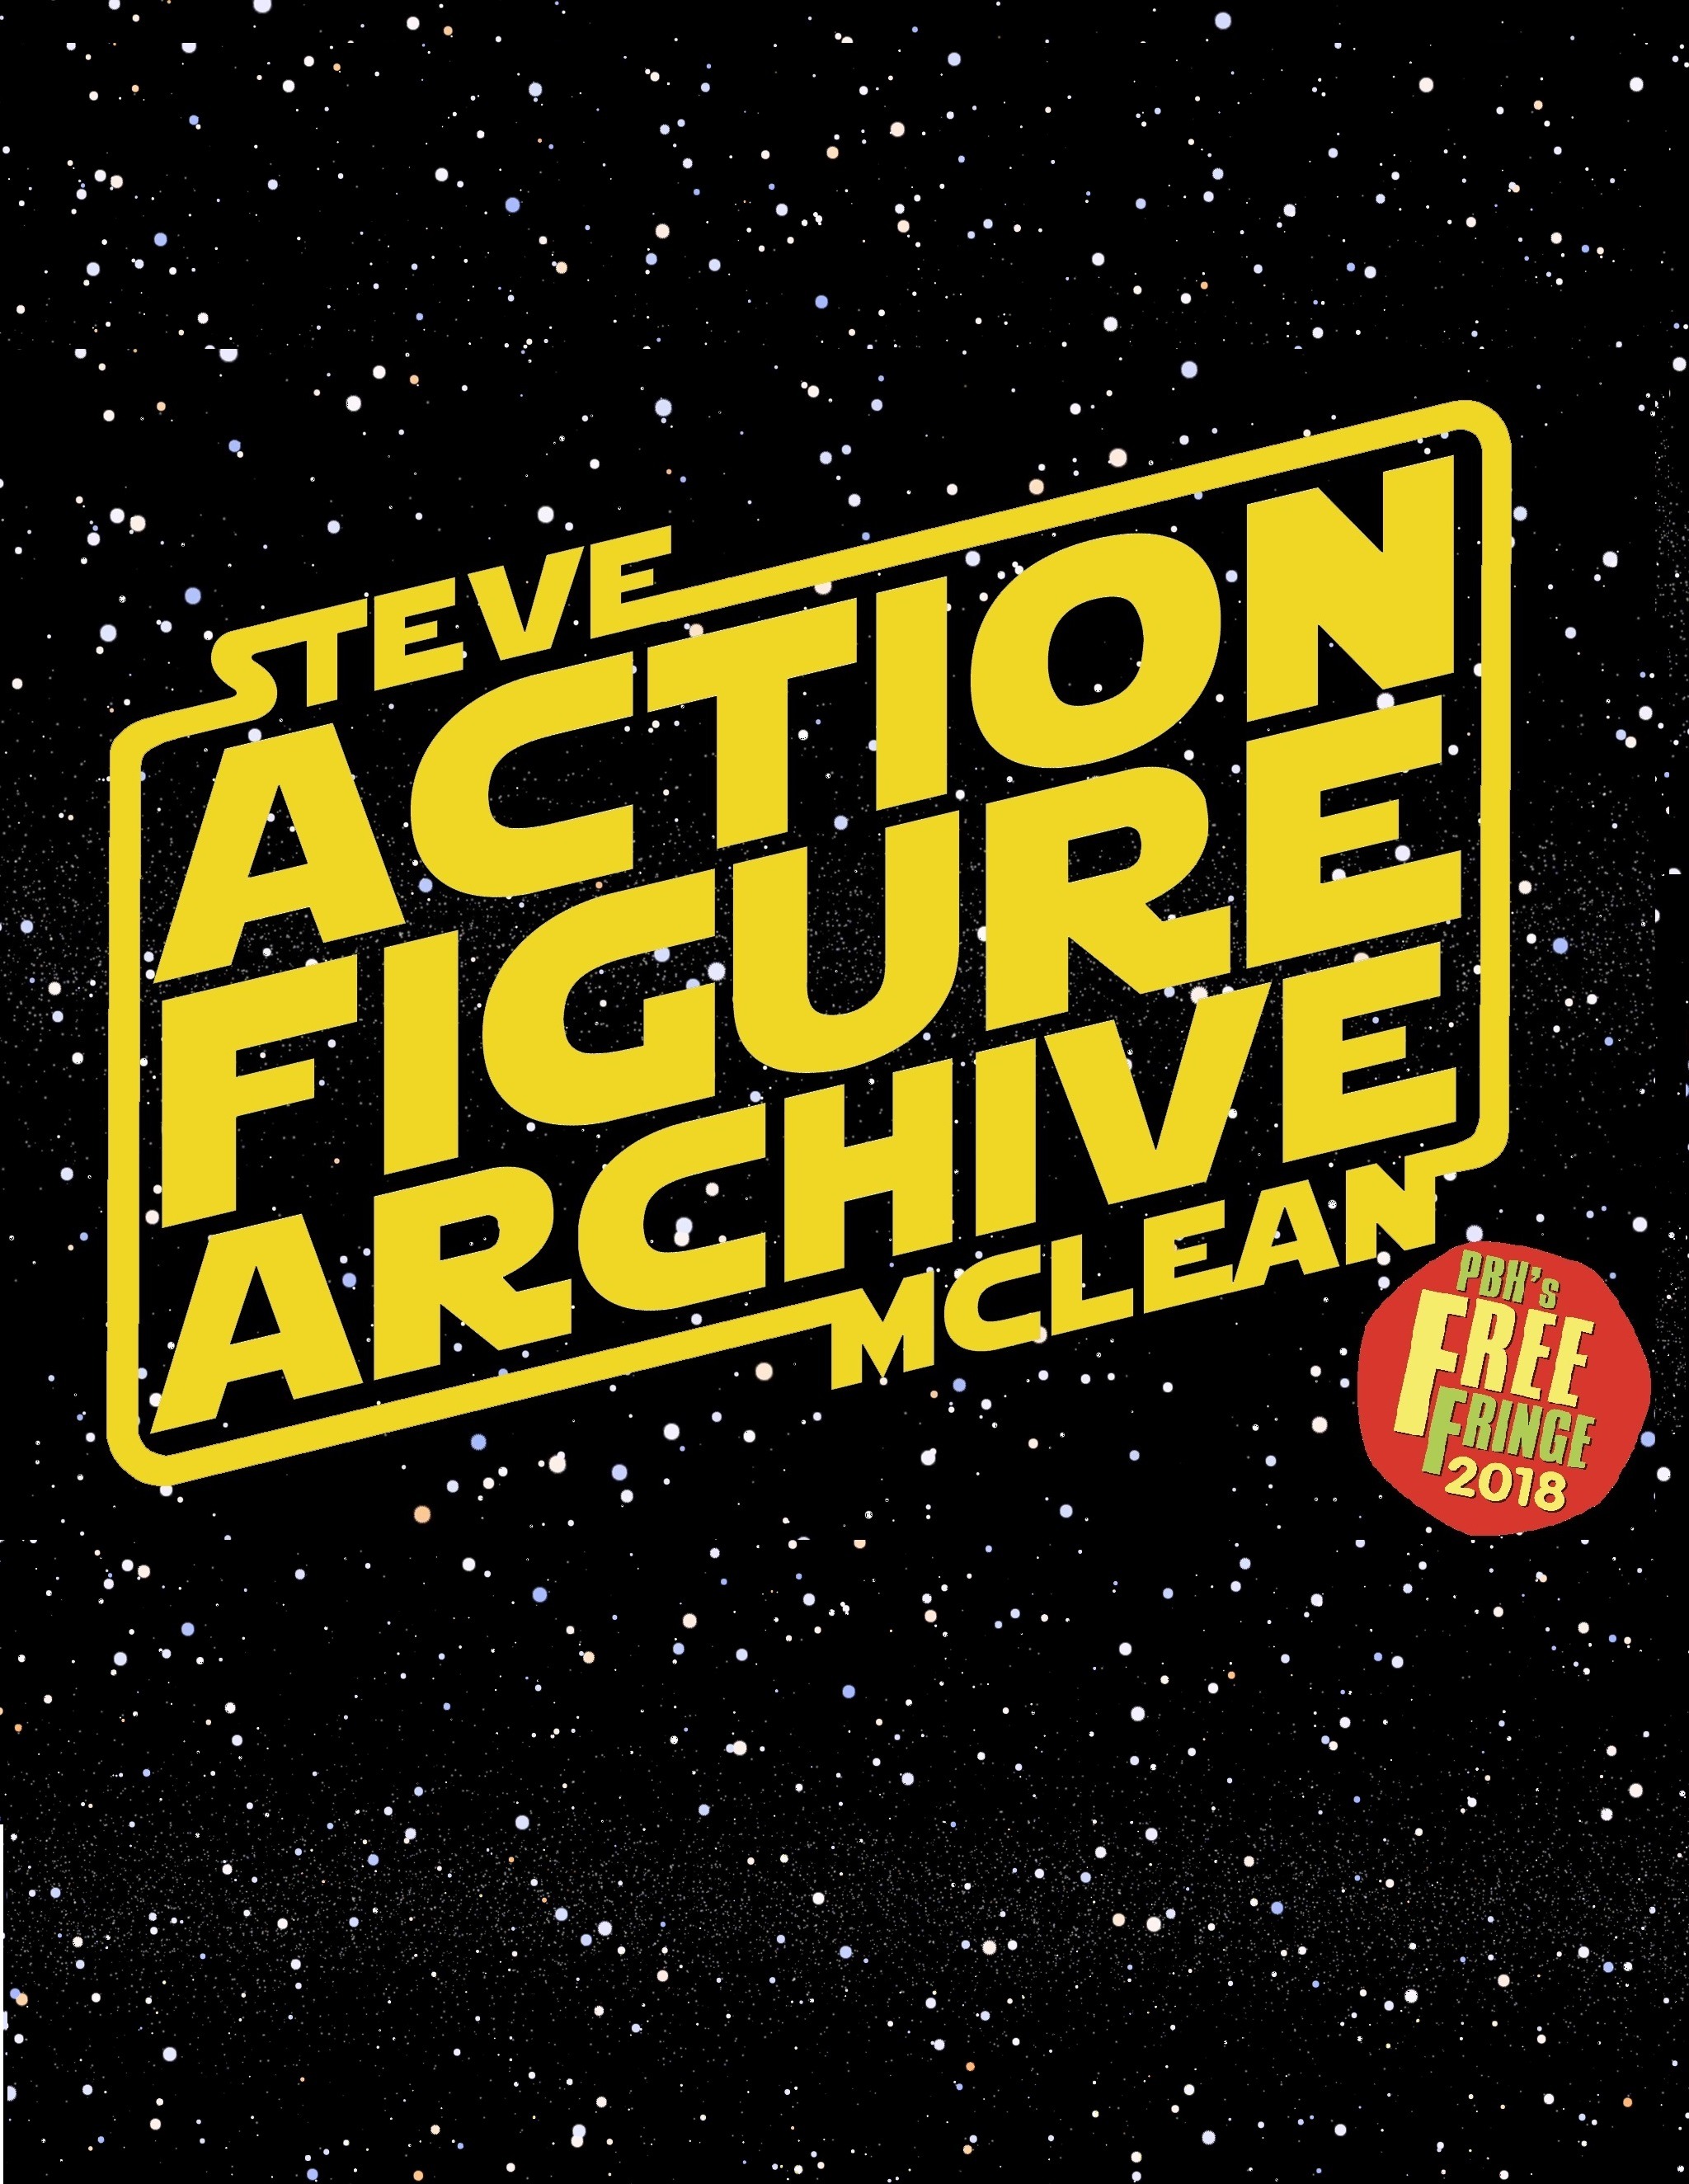 The poster for Action Figure Archive With Steve McLean